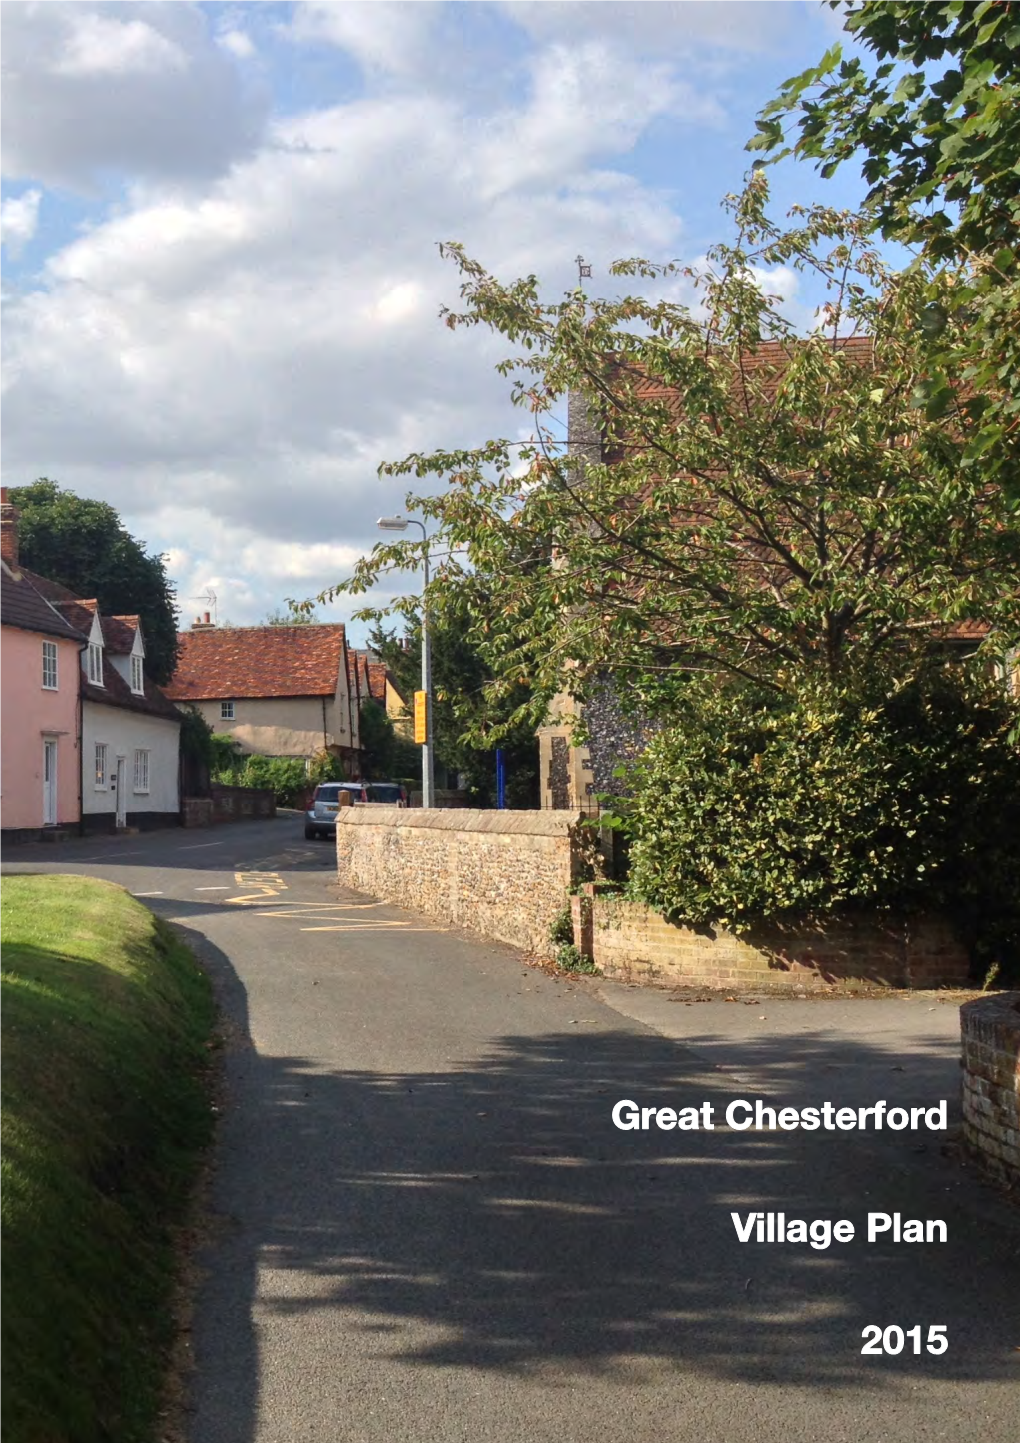 Great Chesterford Village Plan 2015